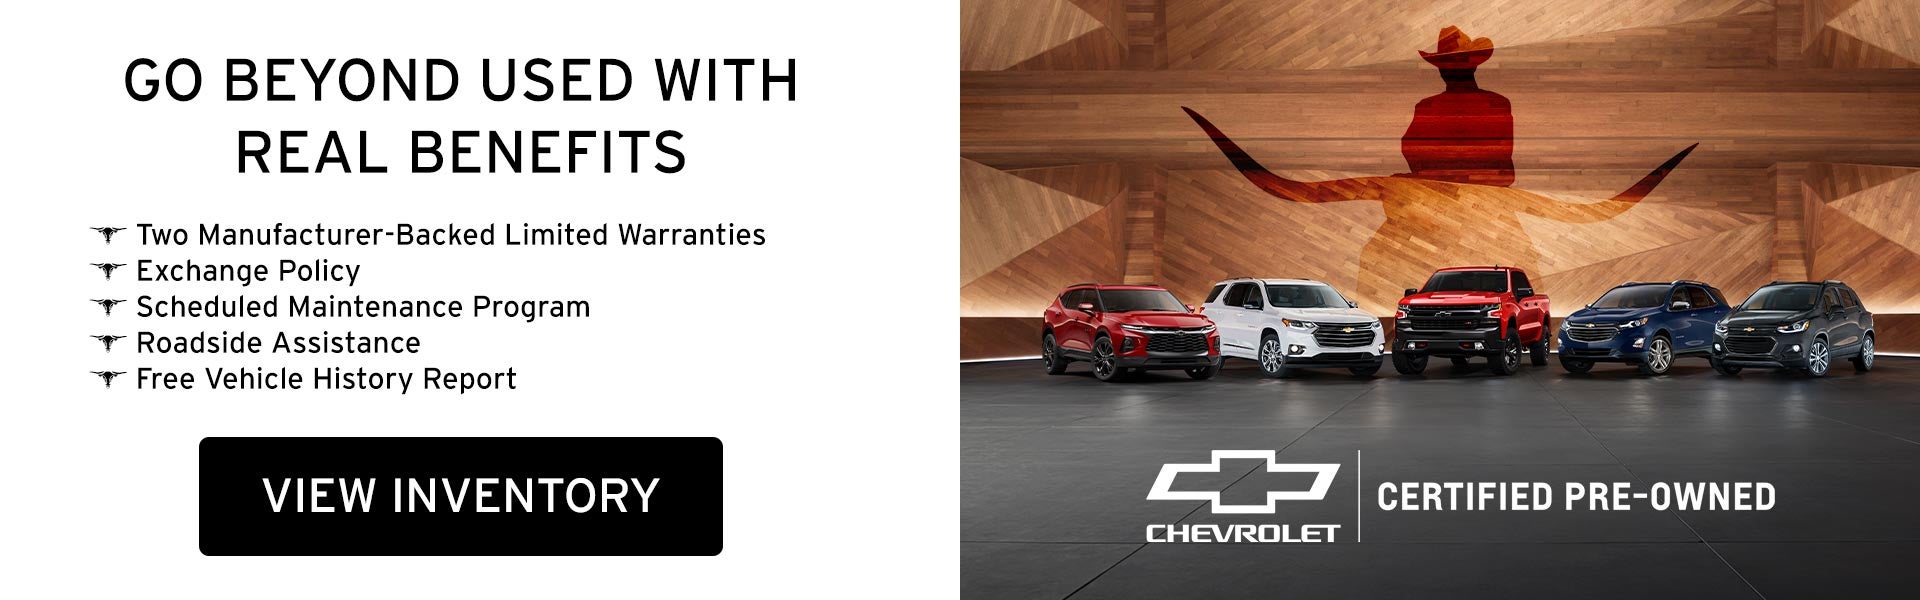 Chevrolet Certified Pre-Owned Inventory